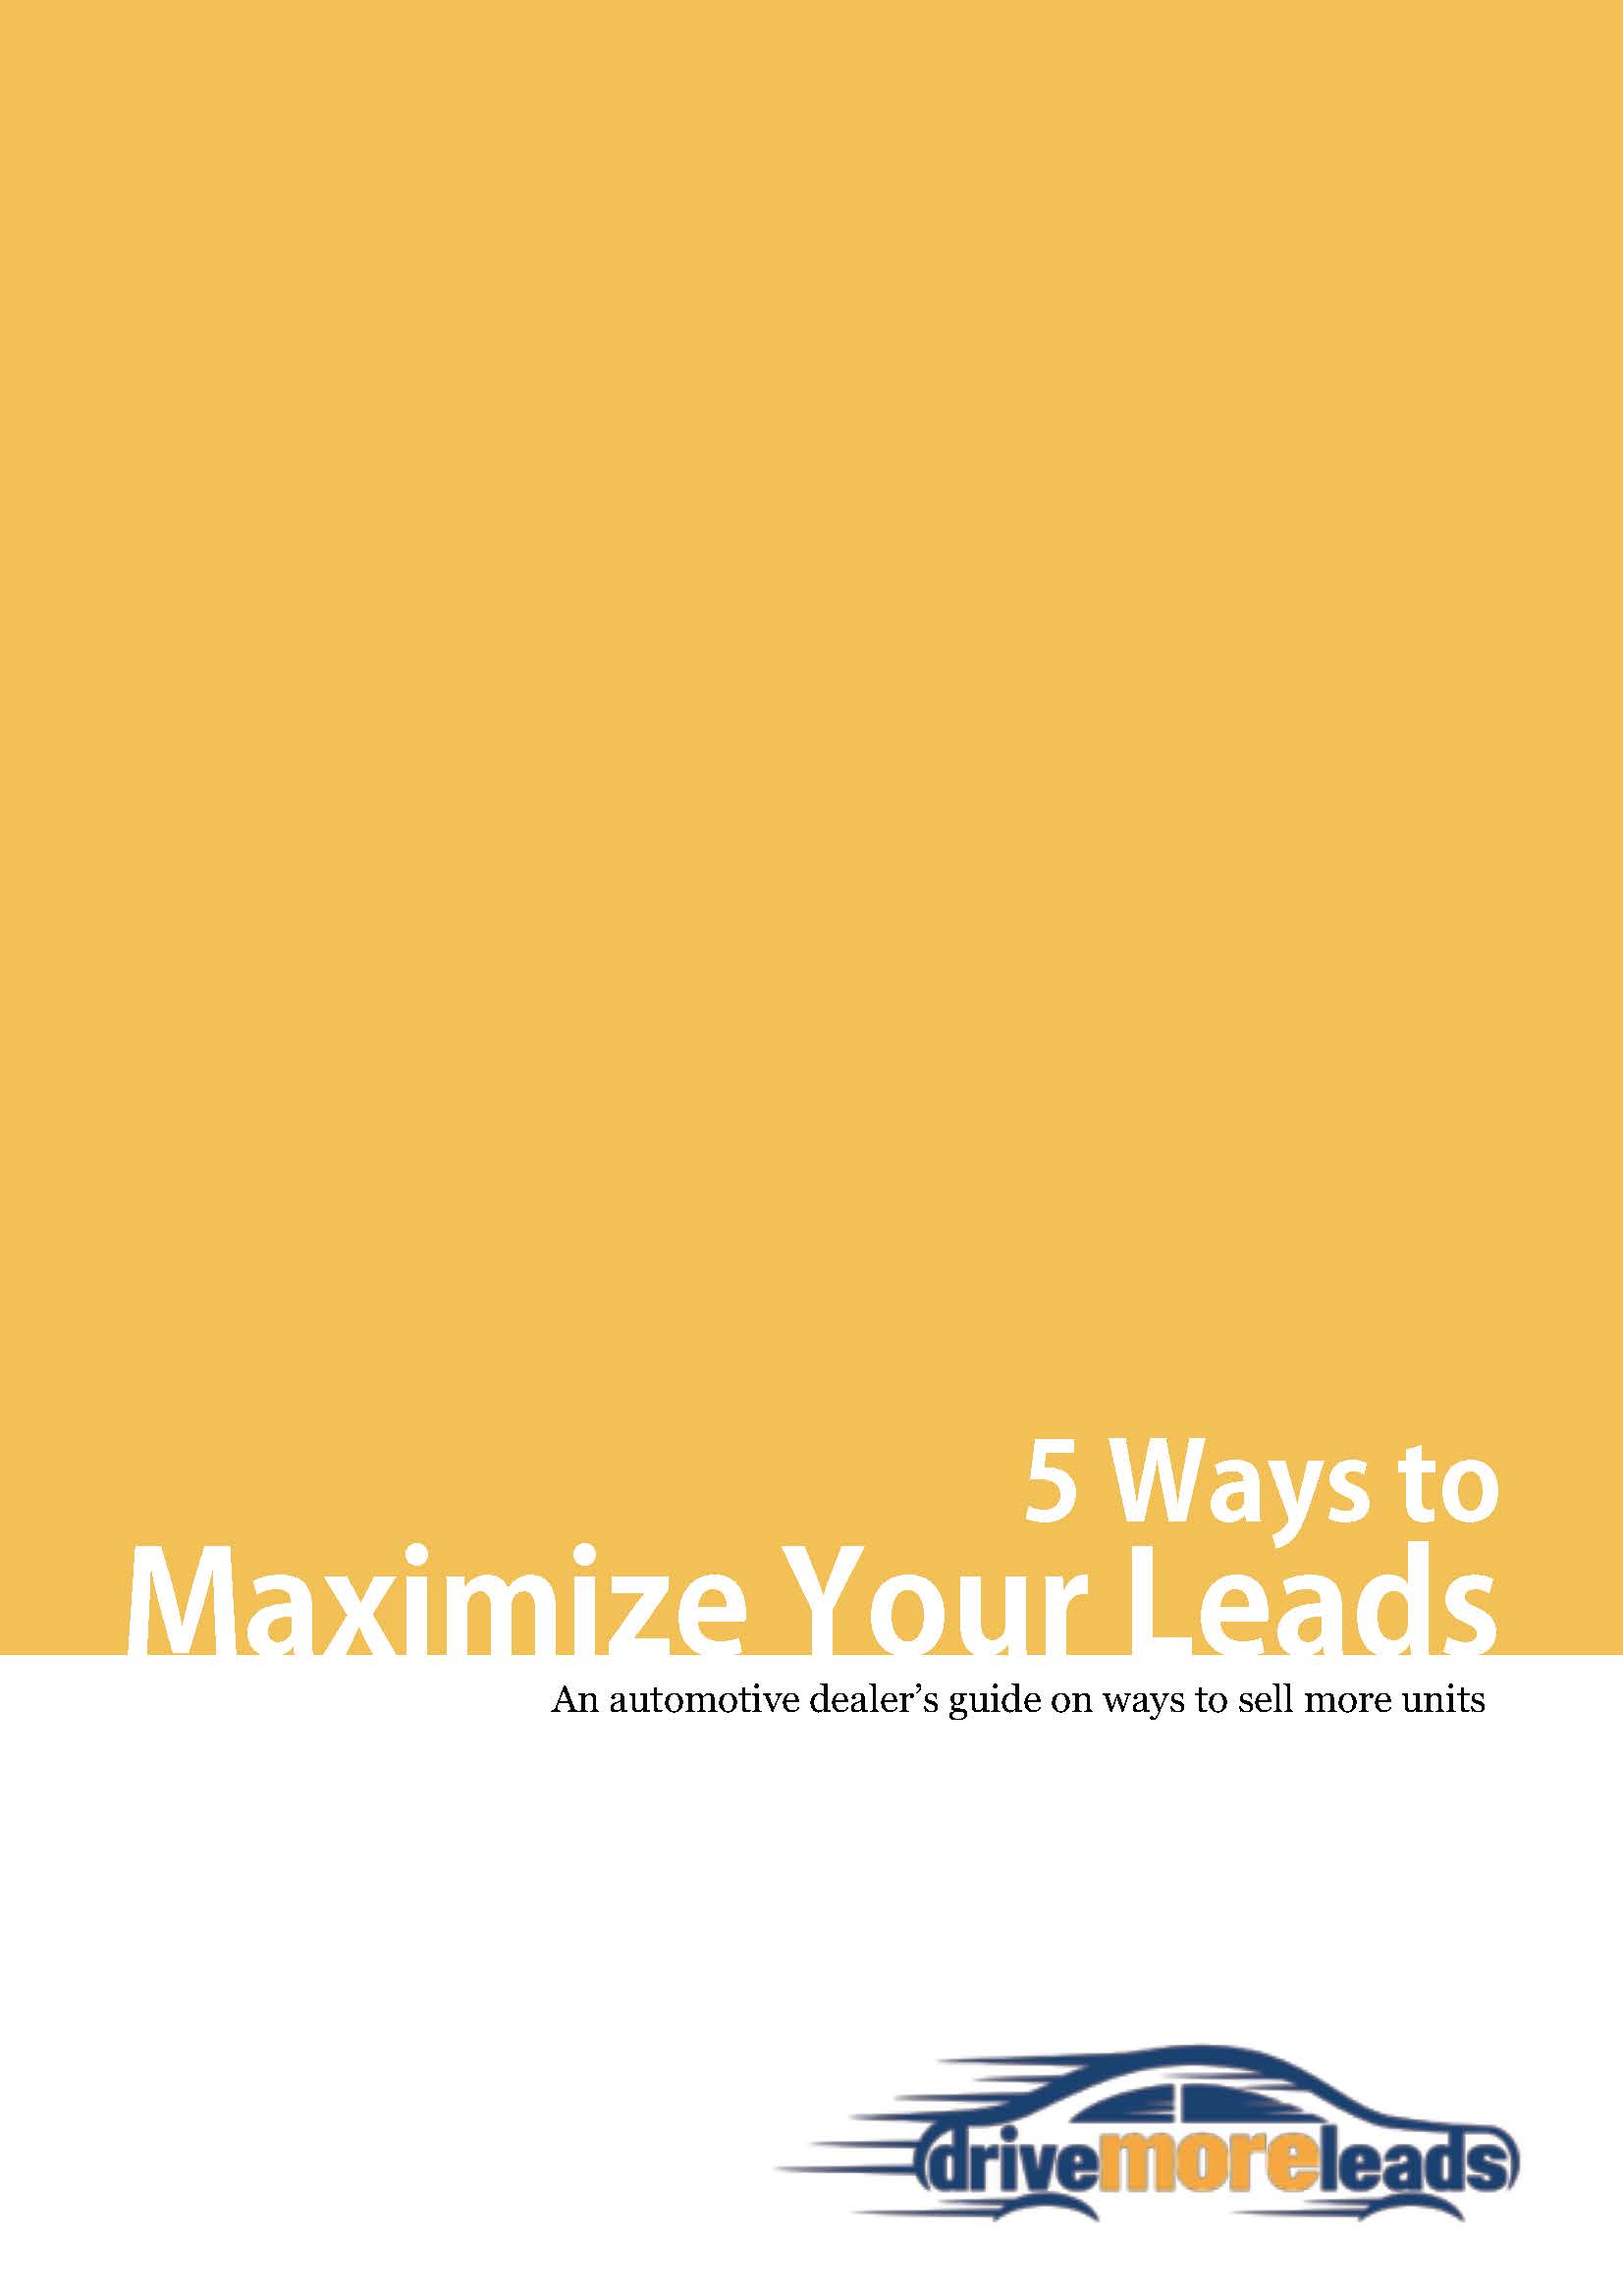 5 Ways to Maximize Your Leads, setting the appointment